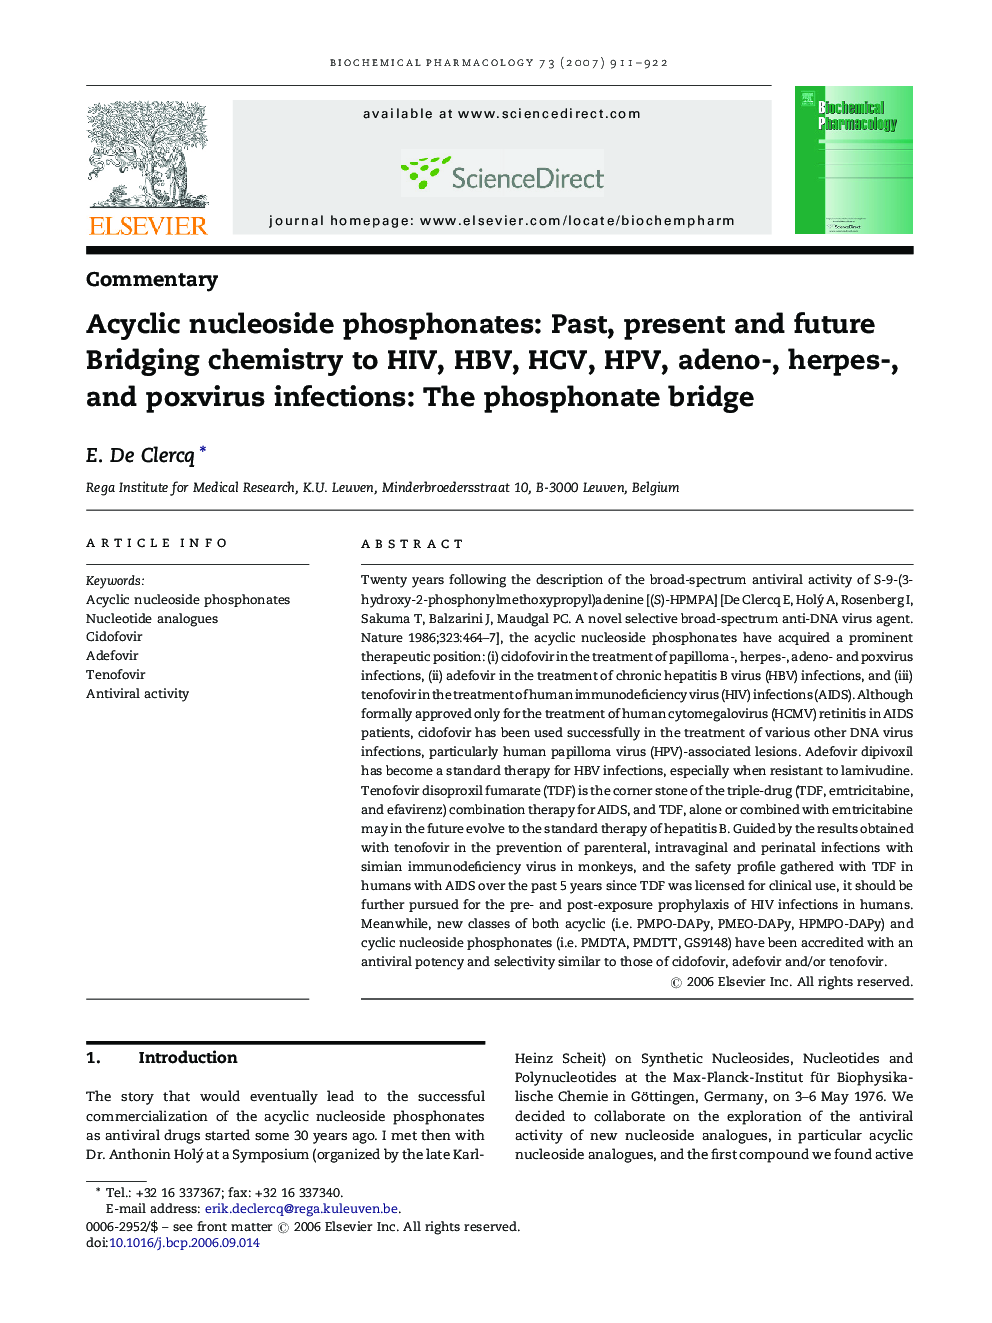 Acyclic nucleoside phosphonates: Past, present and future: Bridging chemistry to HIV, HBV, HCV, HPV, adeno-, herpes-, and poxvirus infections: The phosphonate bridge